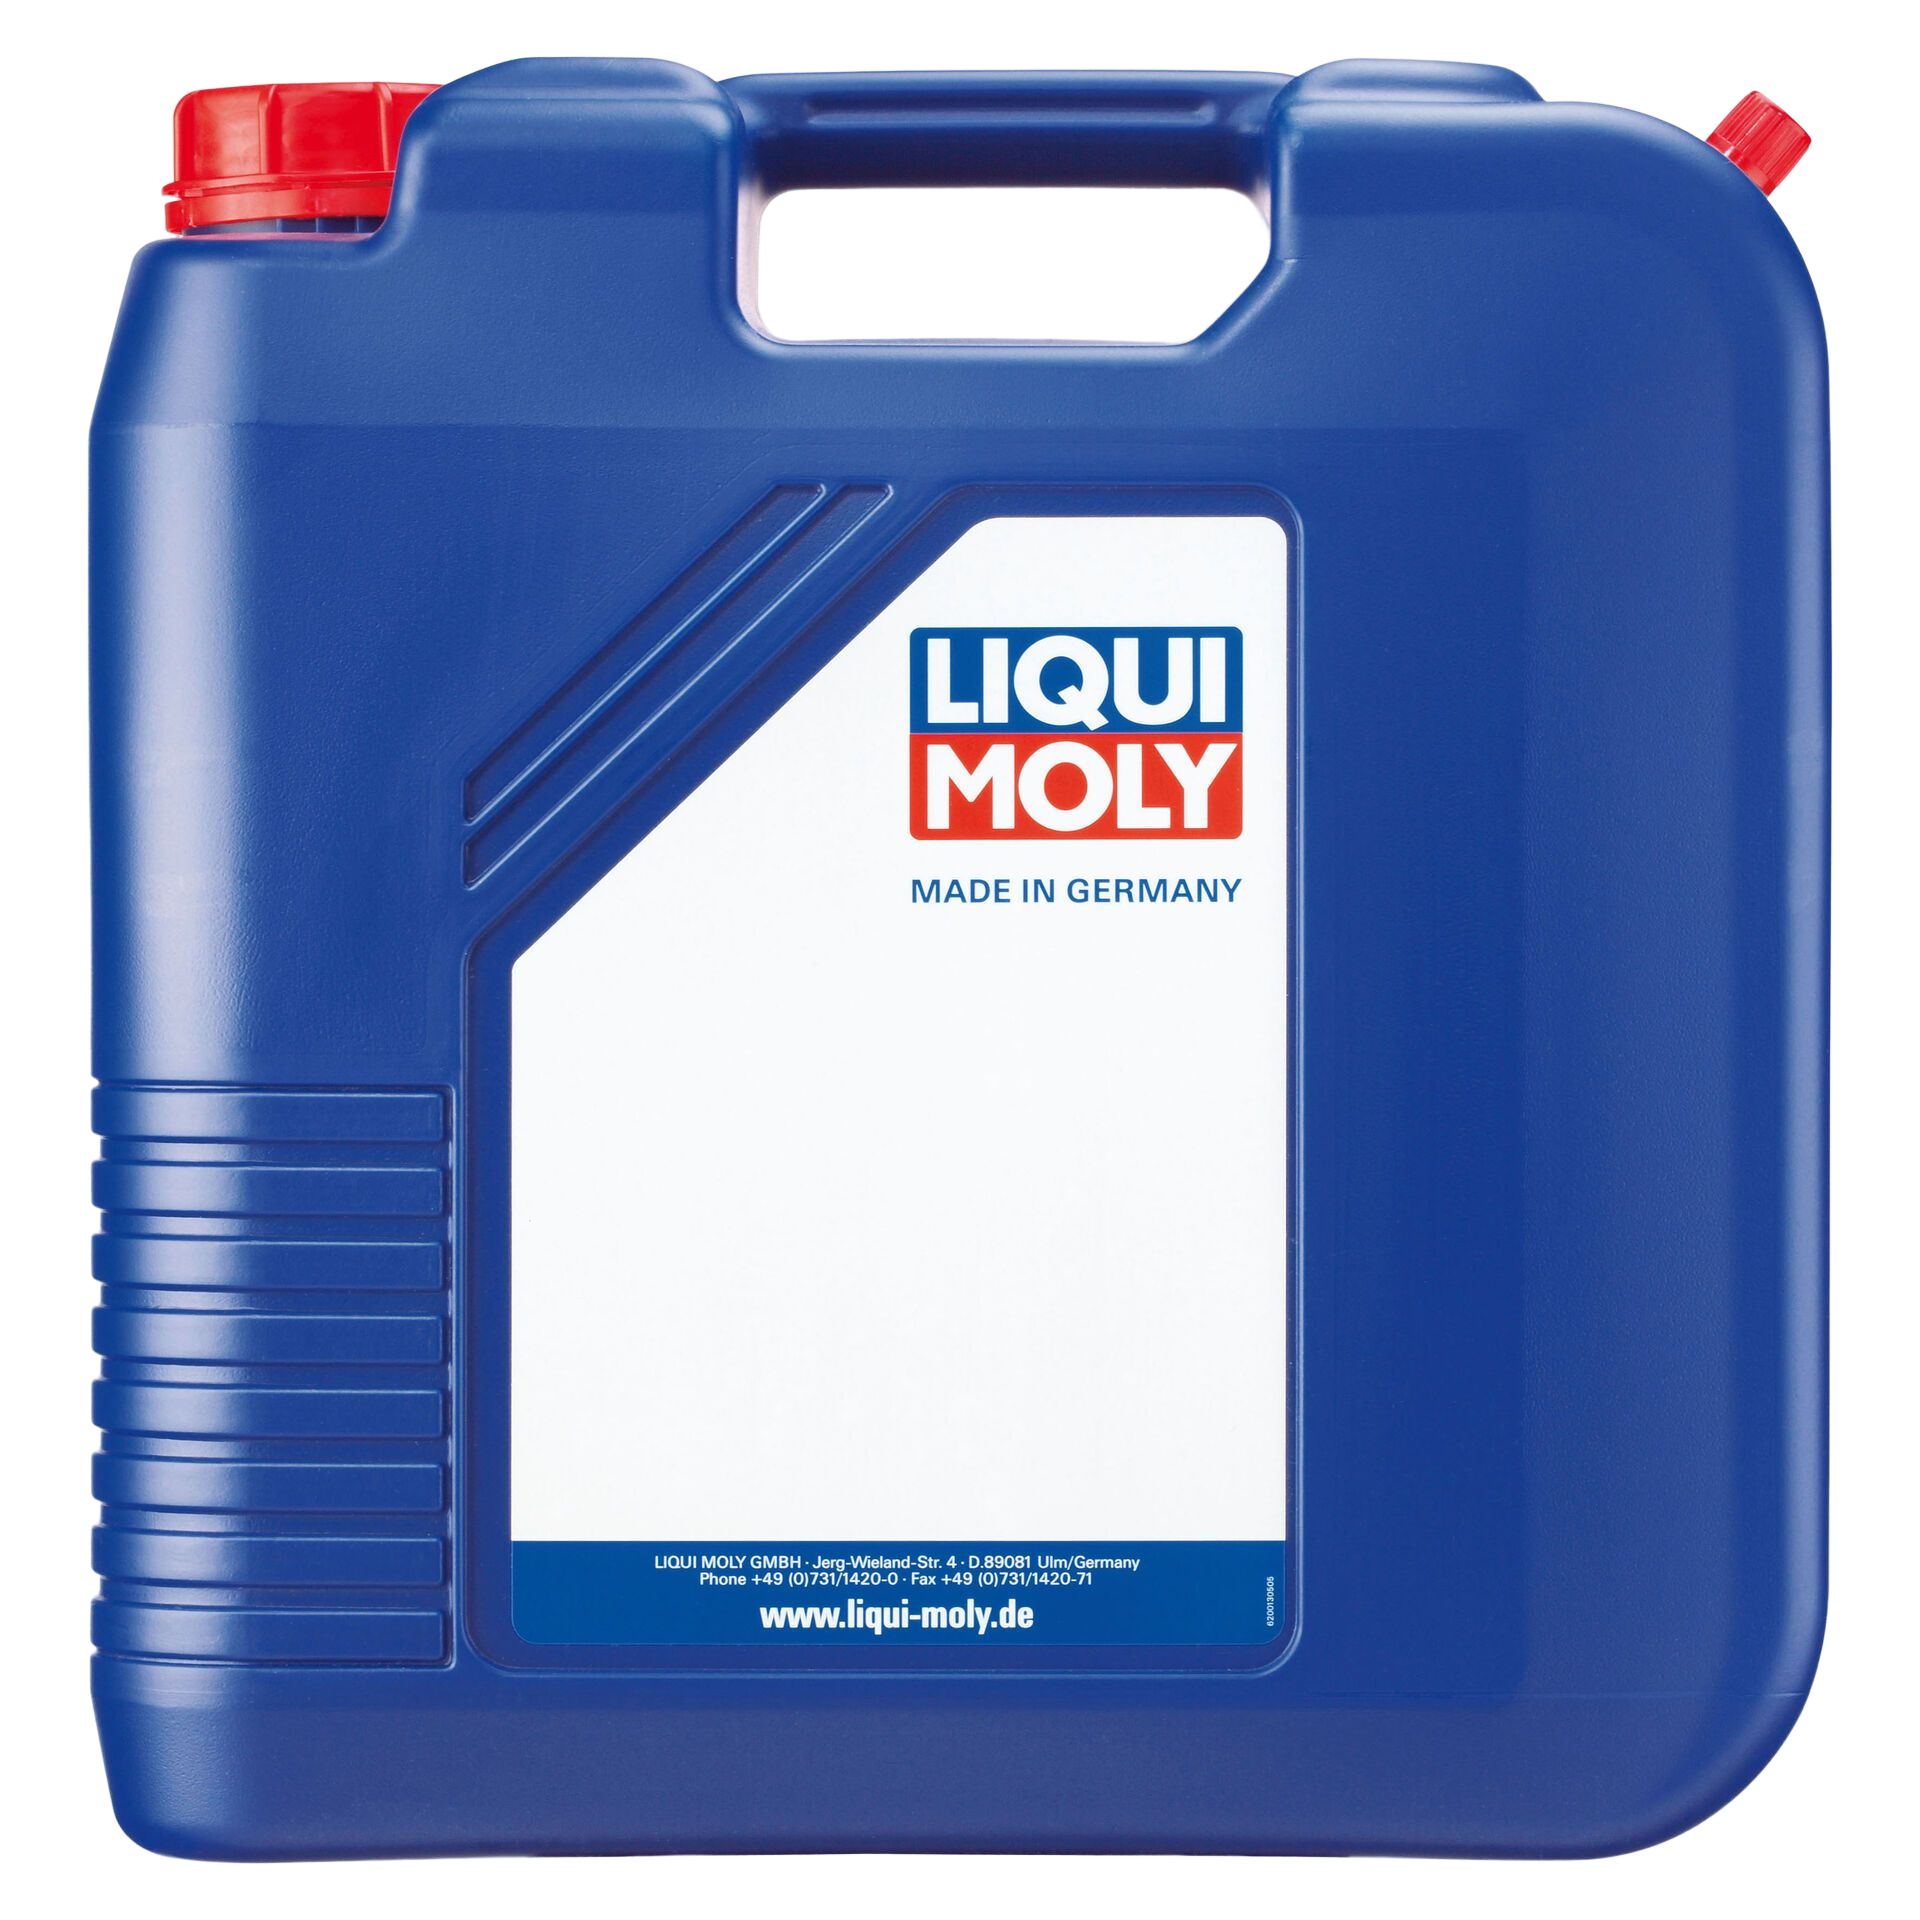 Liqui Moly Transmissieolie Synth ISO VG 150, 20 lt